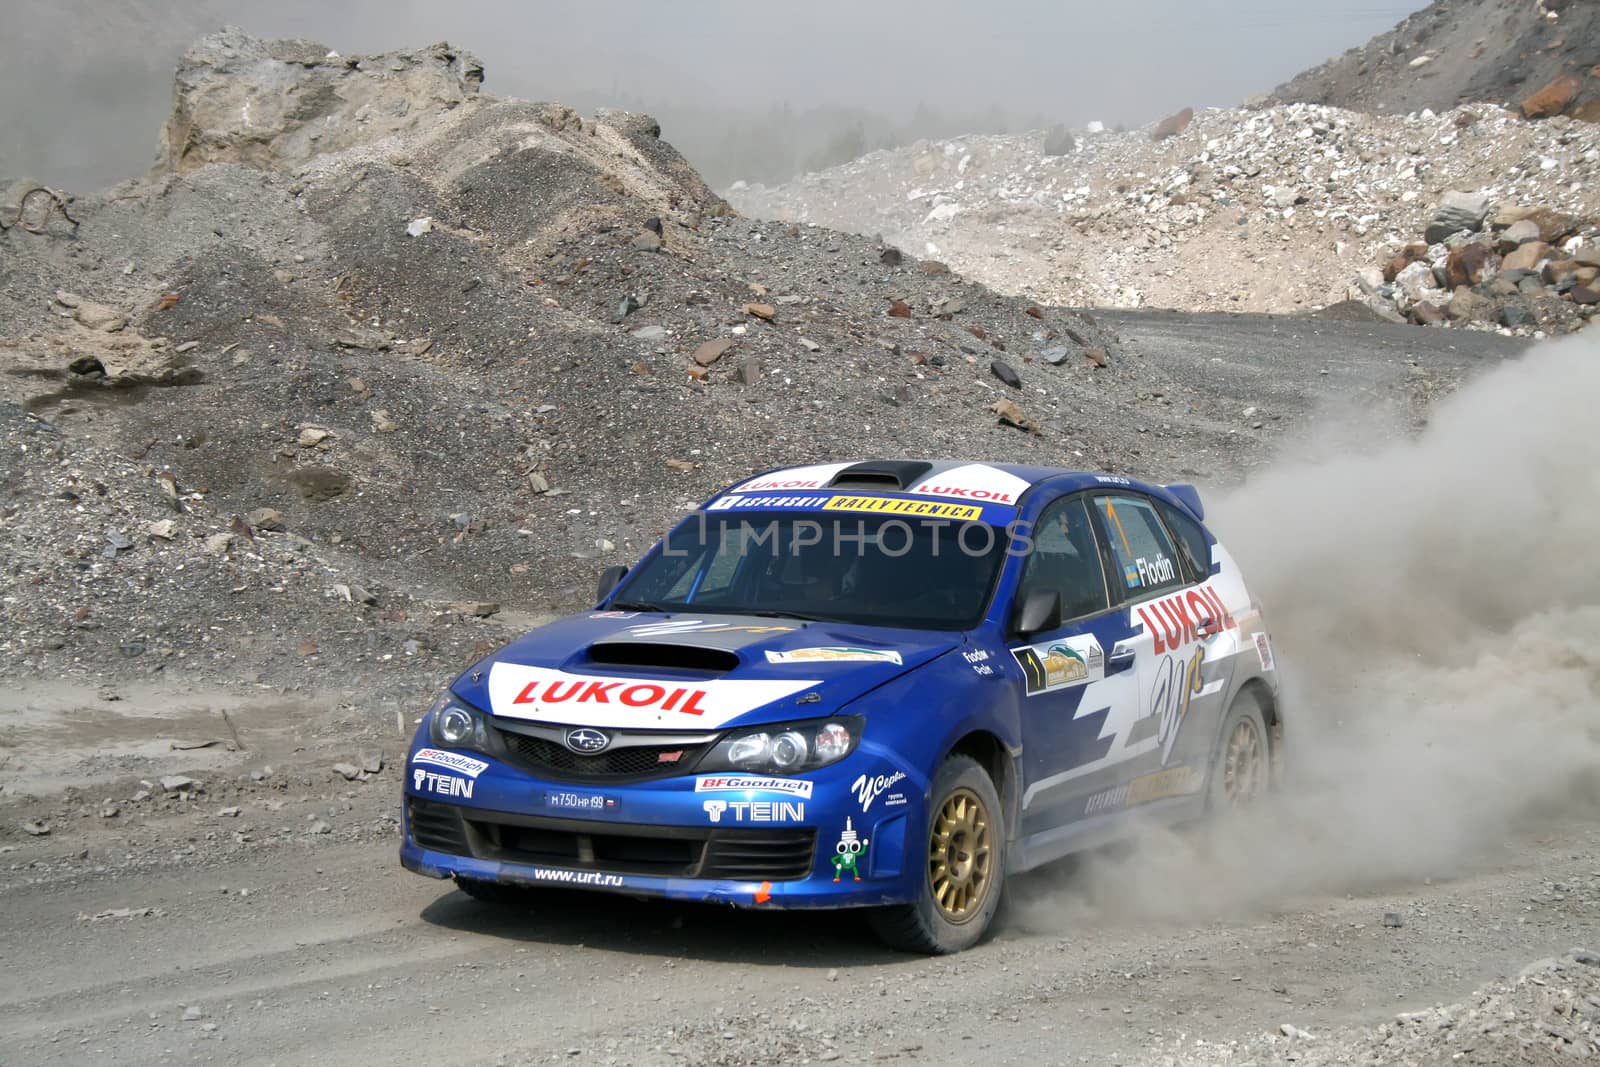 BAKAL, RUSSIA - AUGUST 13: Patrik Flodin's Subaru Impreza WRC (No. 1) competes at the annual Rally Southern Ural on August 13, 2010 in Bakal, Satka district, Chelyabinsk region, Russia.